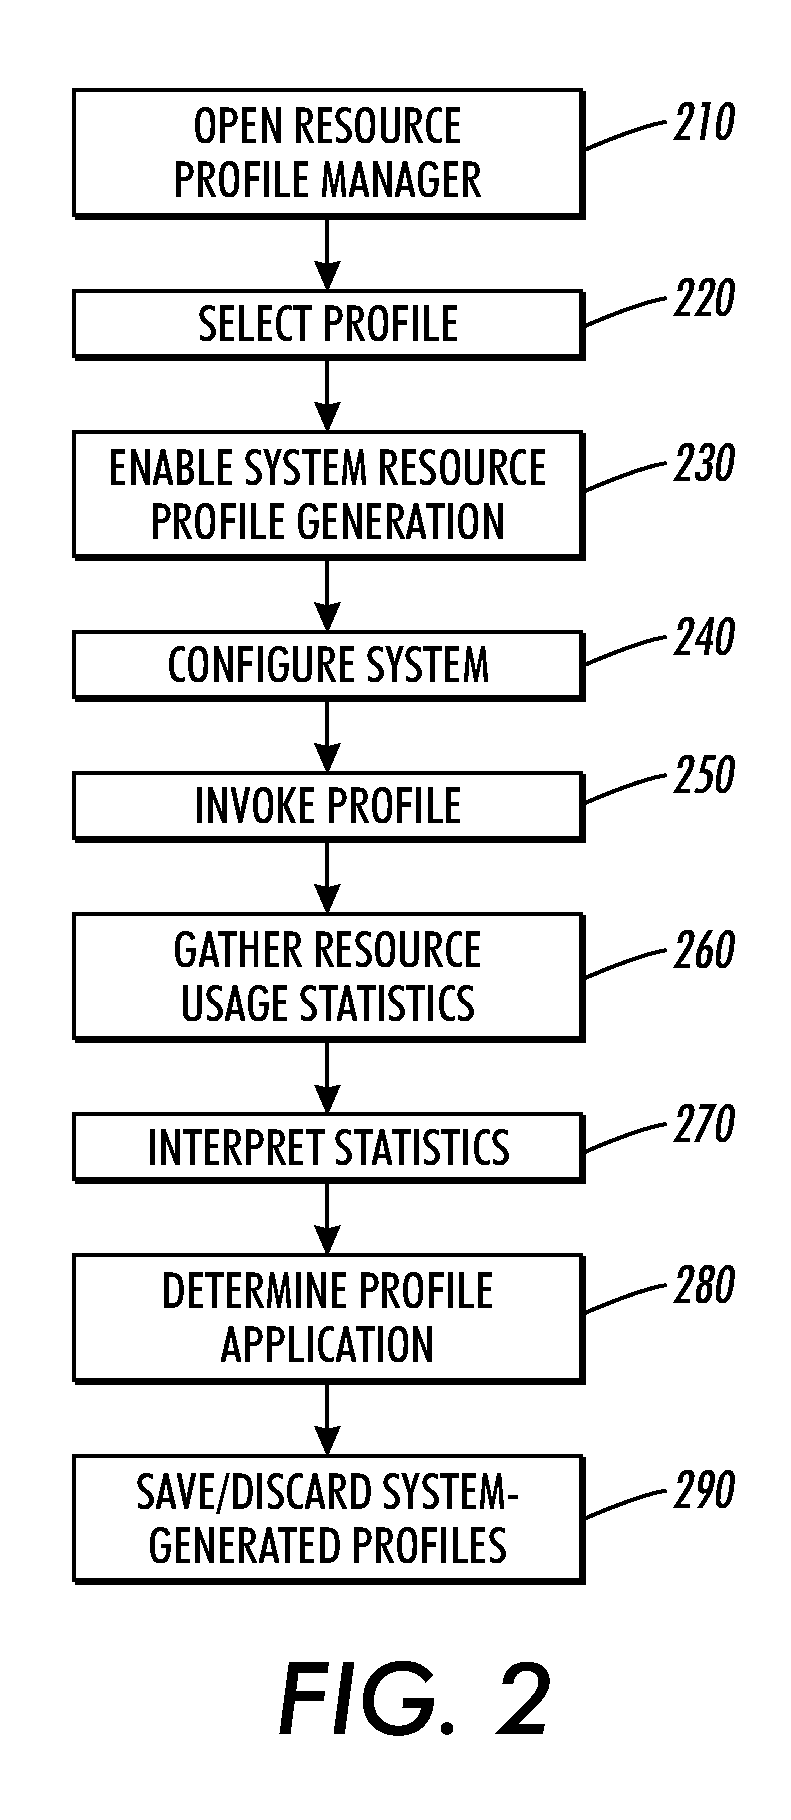 System-generated resource management profiles